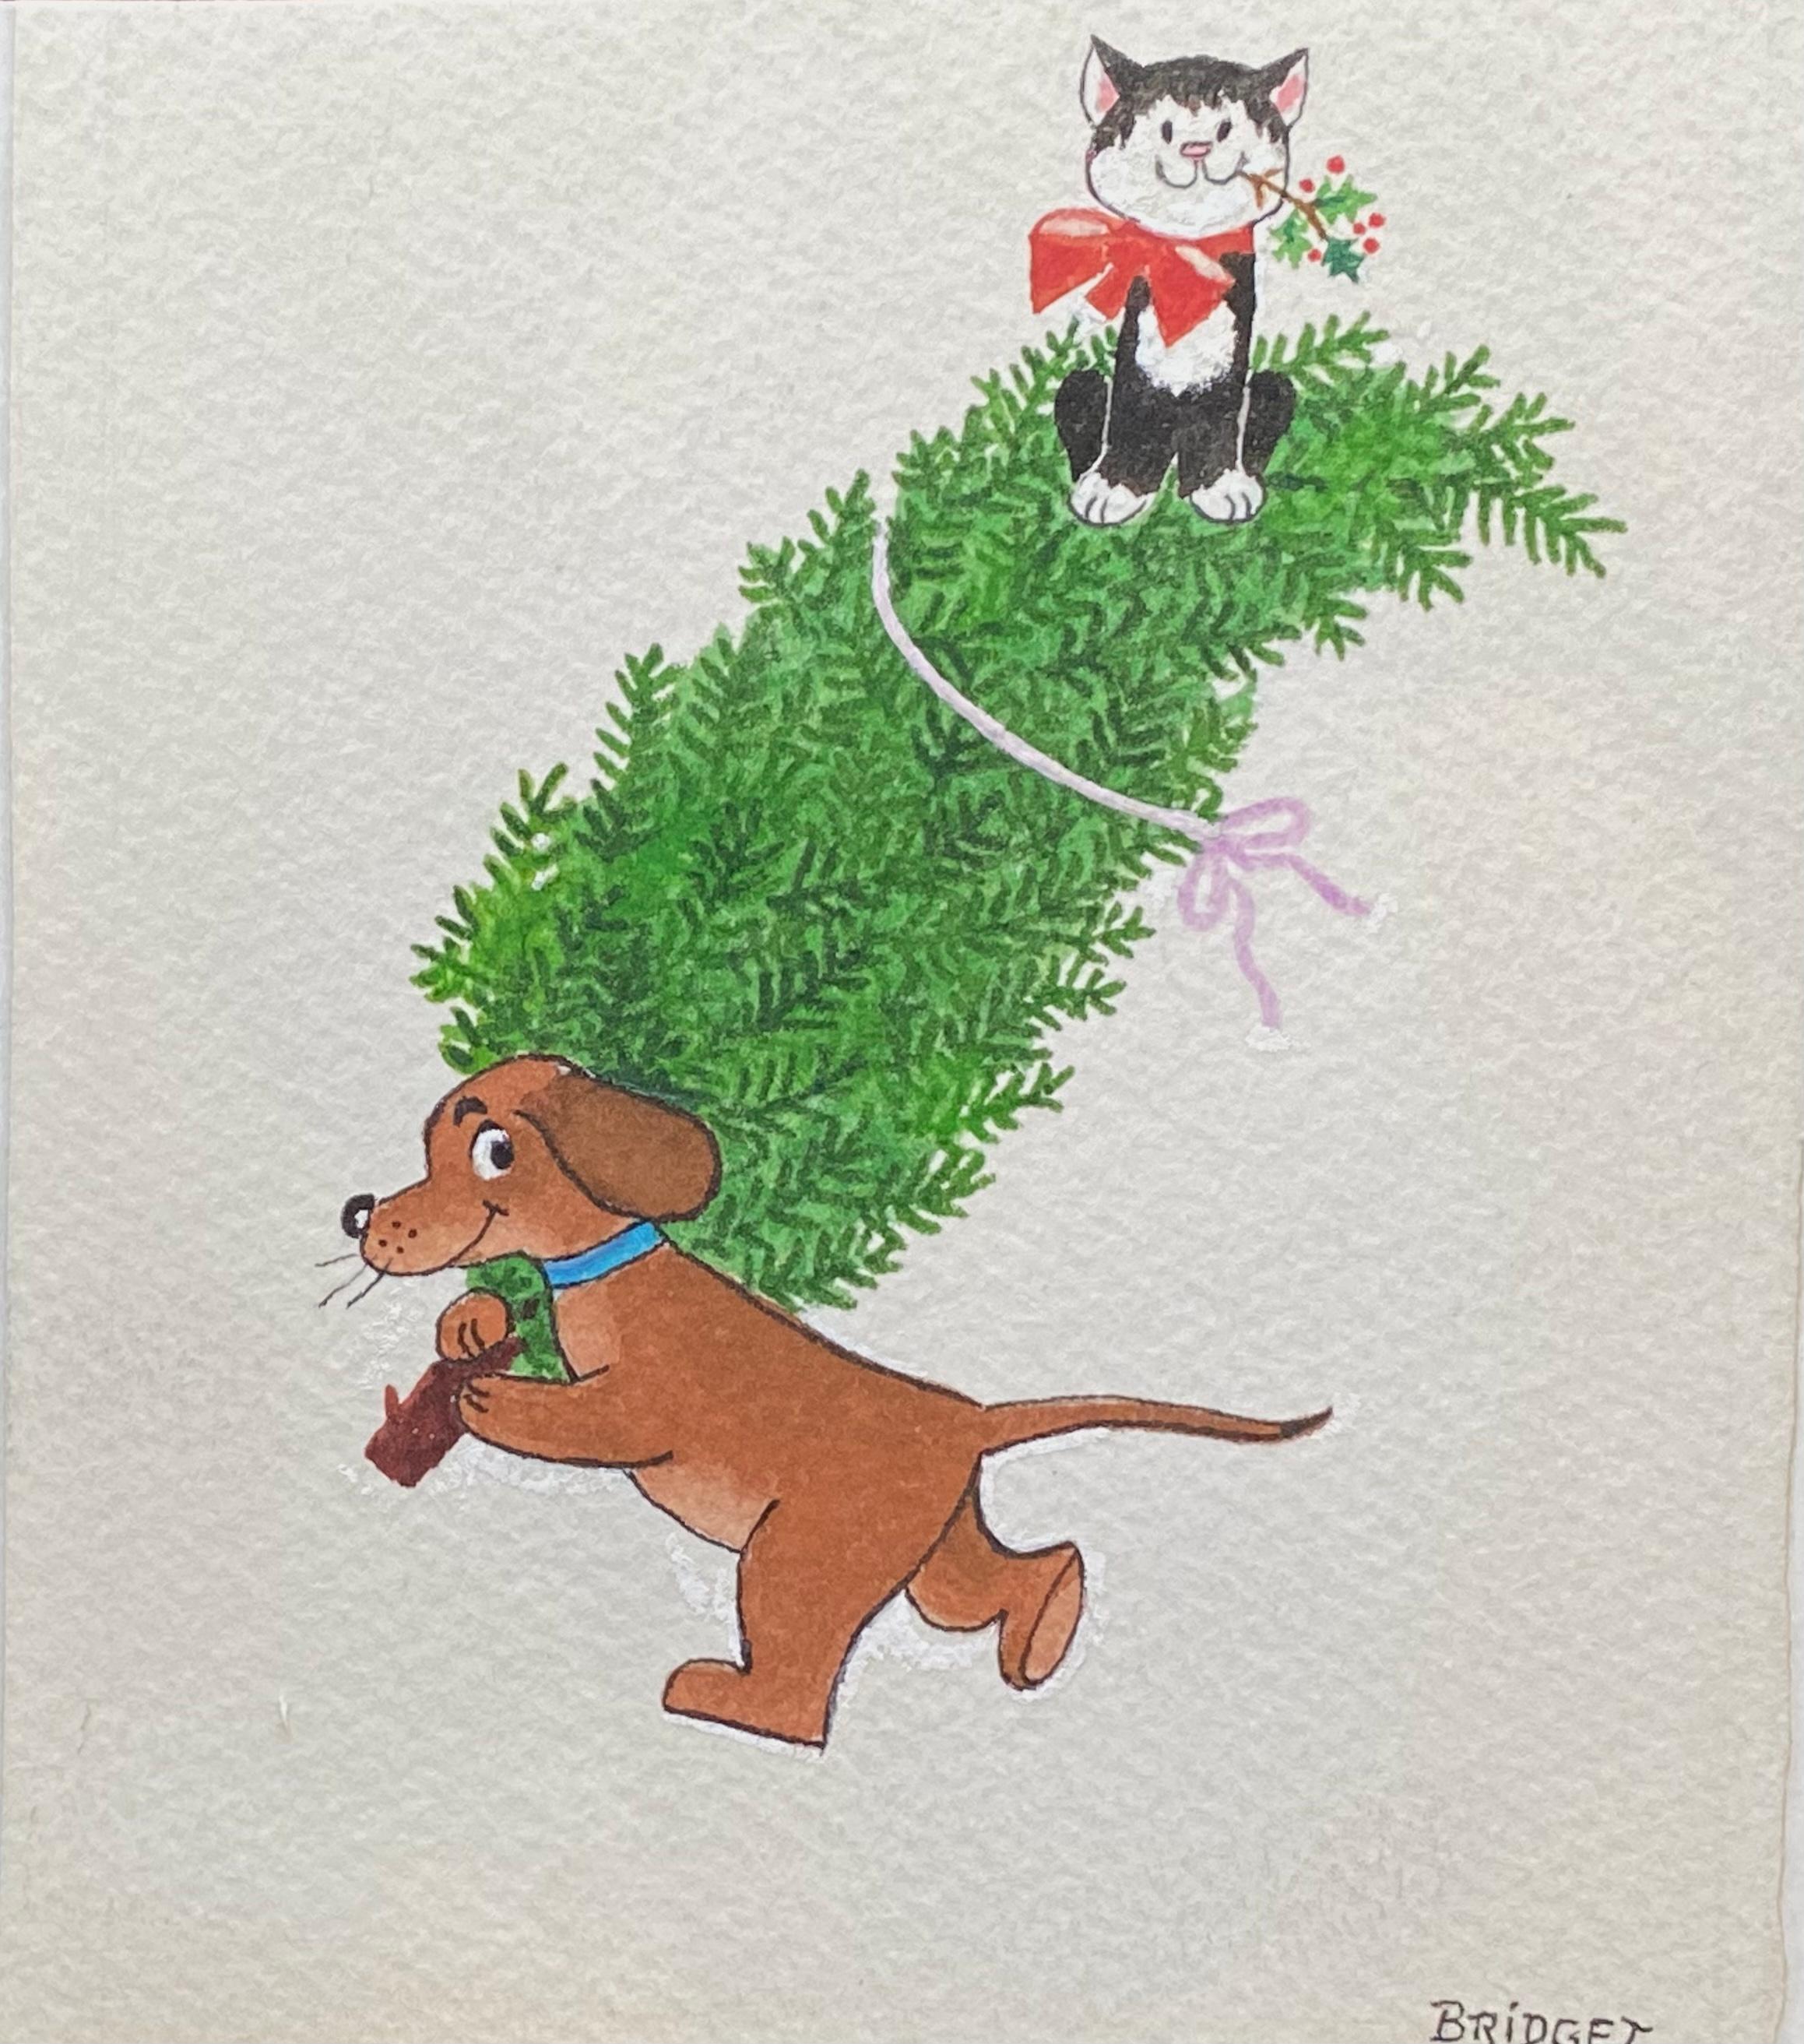 “Puppy with Christmas Tree & Kitty”